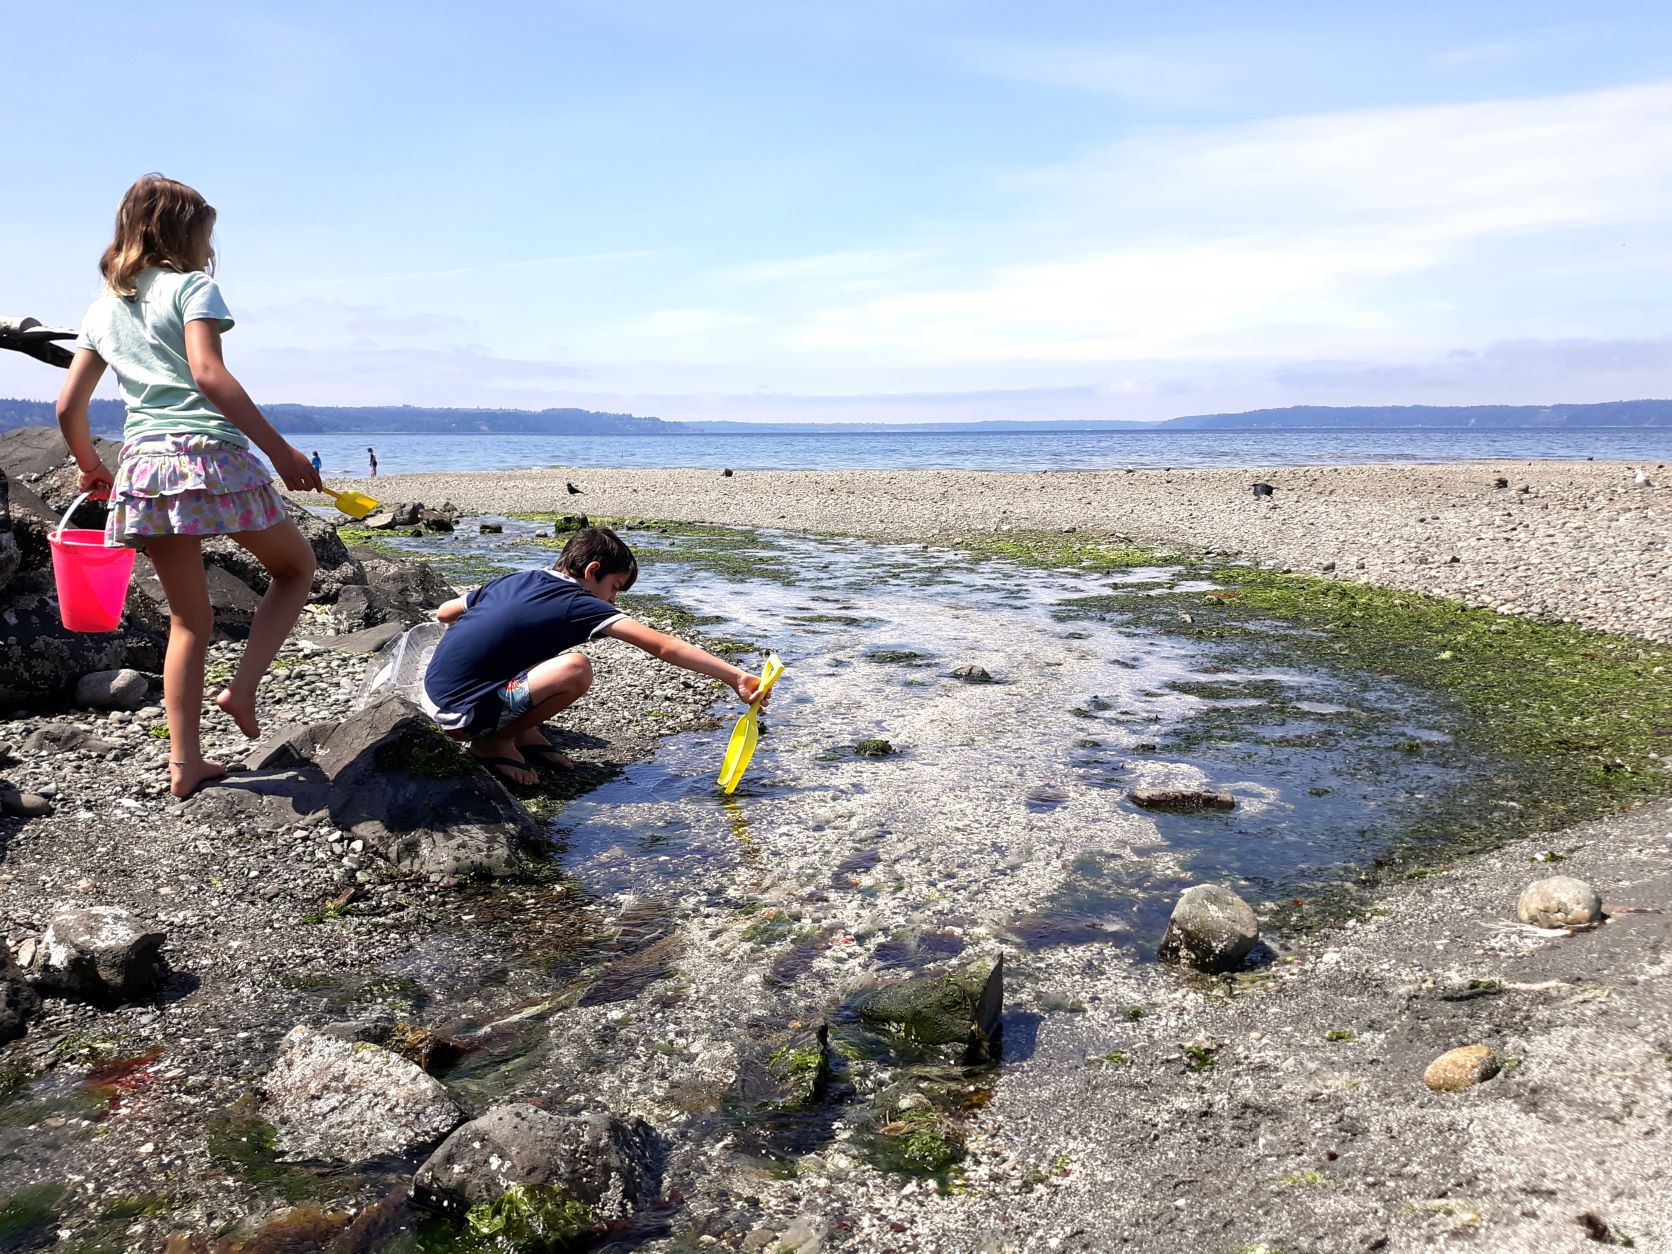 Adventure Travel at state parks: Two children with small plastic buckets and toy shovels exploring a freshwater creek as it flows into the Puget Sound during lowtide at Saltwater State Park in Des Moines, Washington.